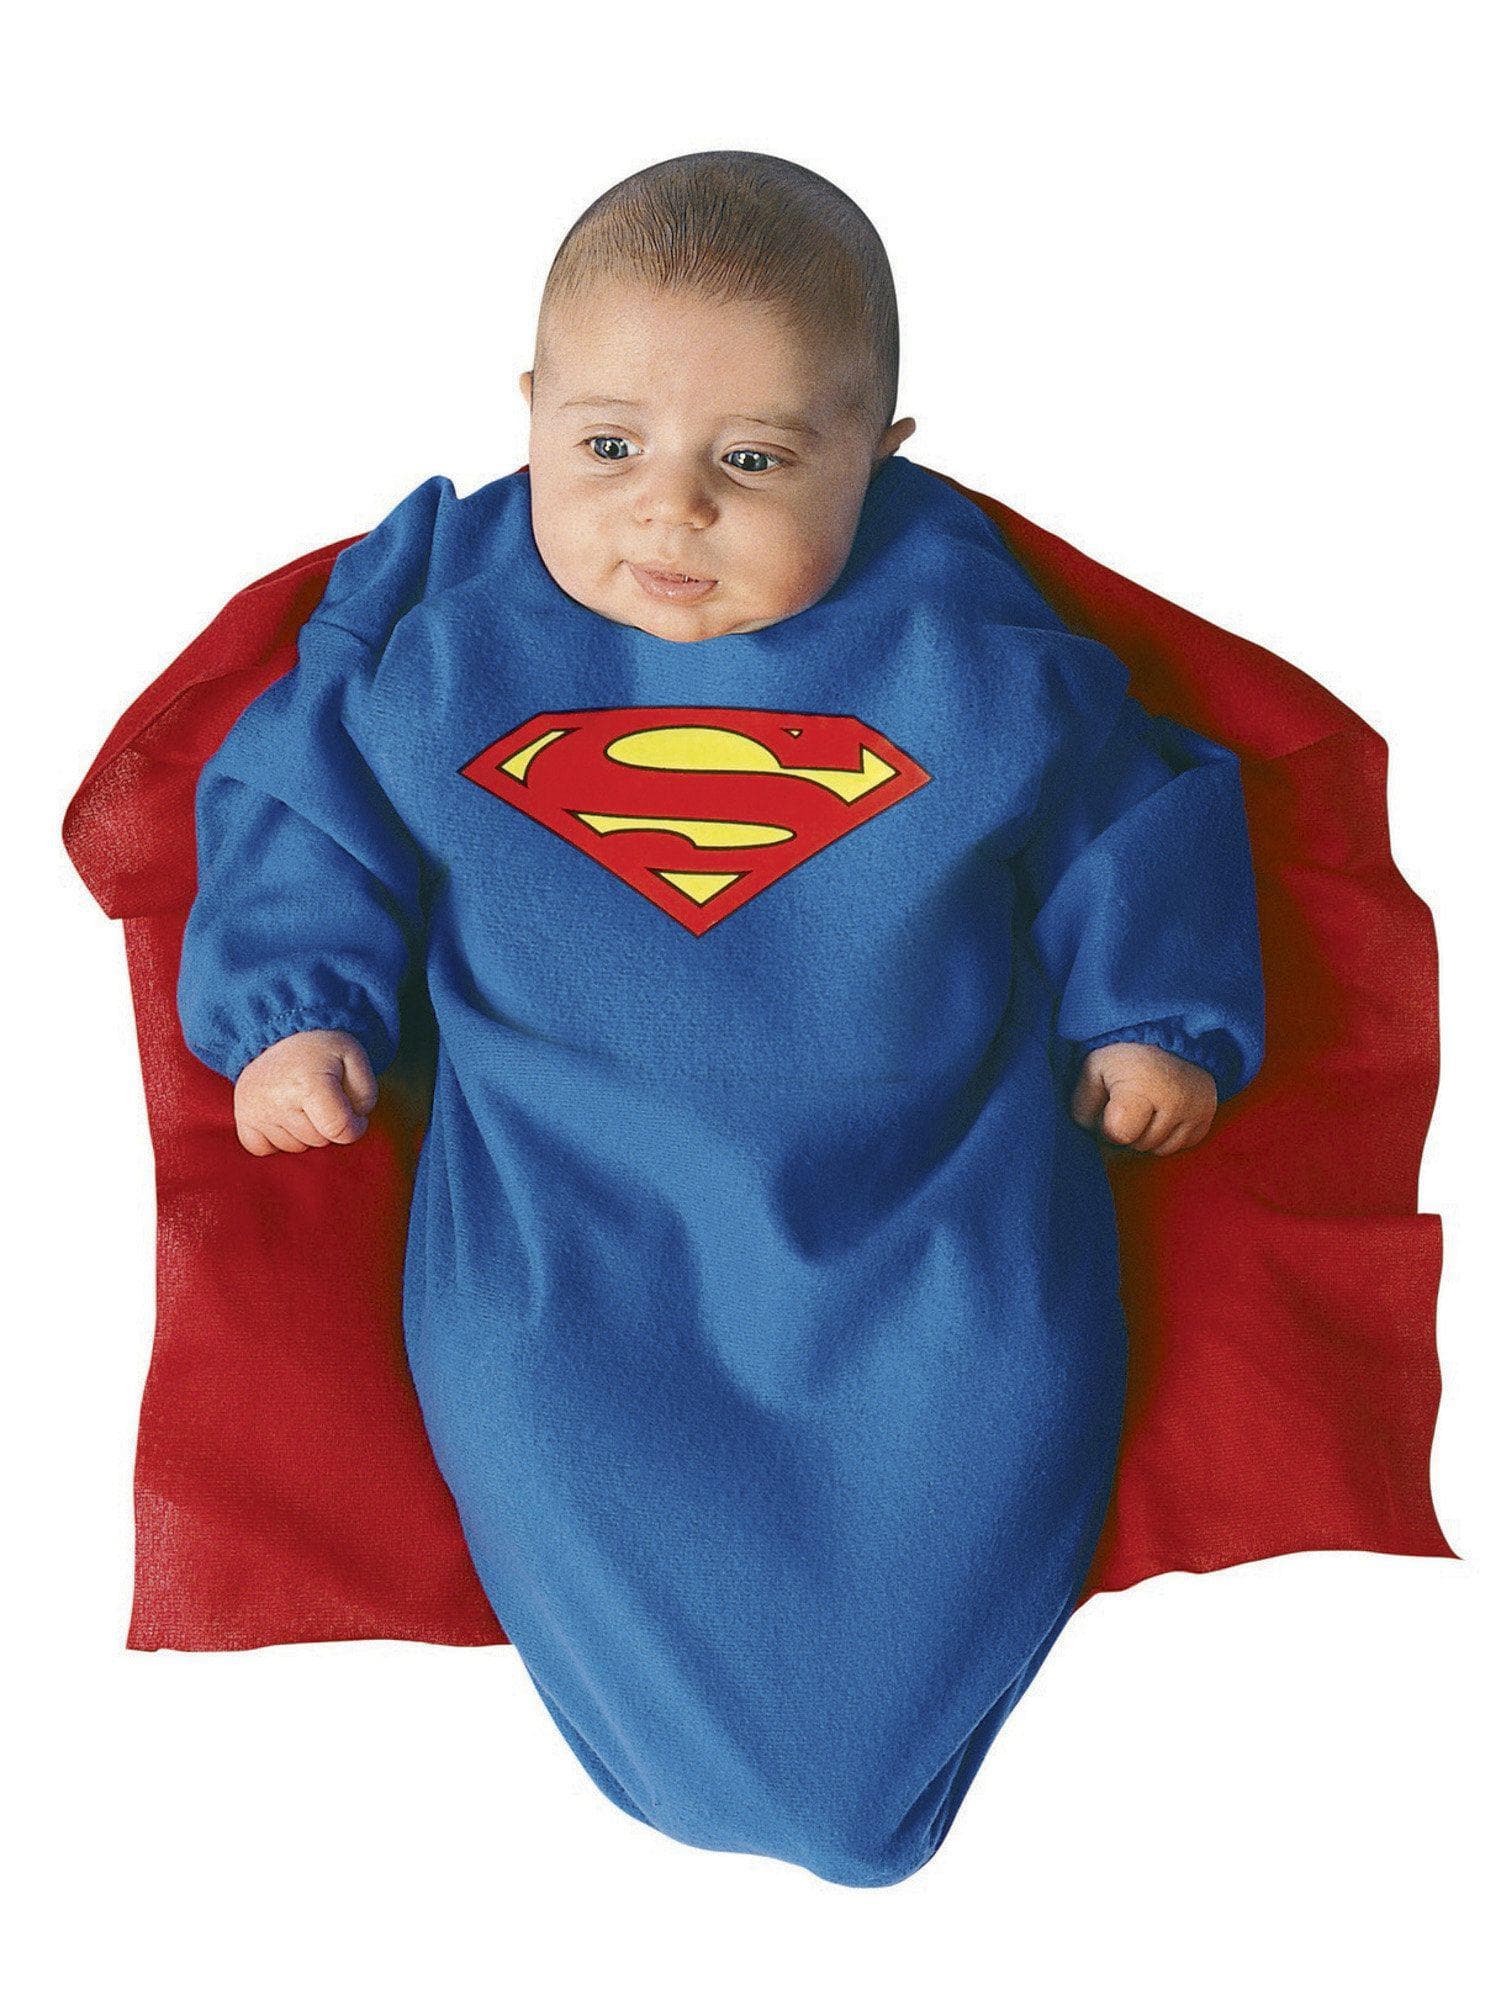 Baby/Toddler Justice League Superman Costume - costumes.com